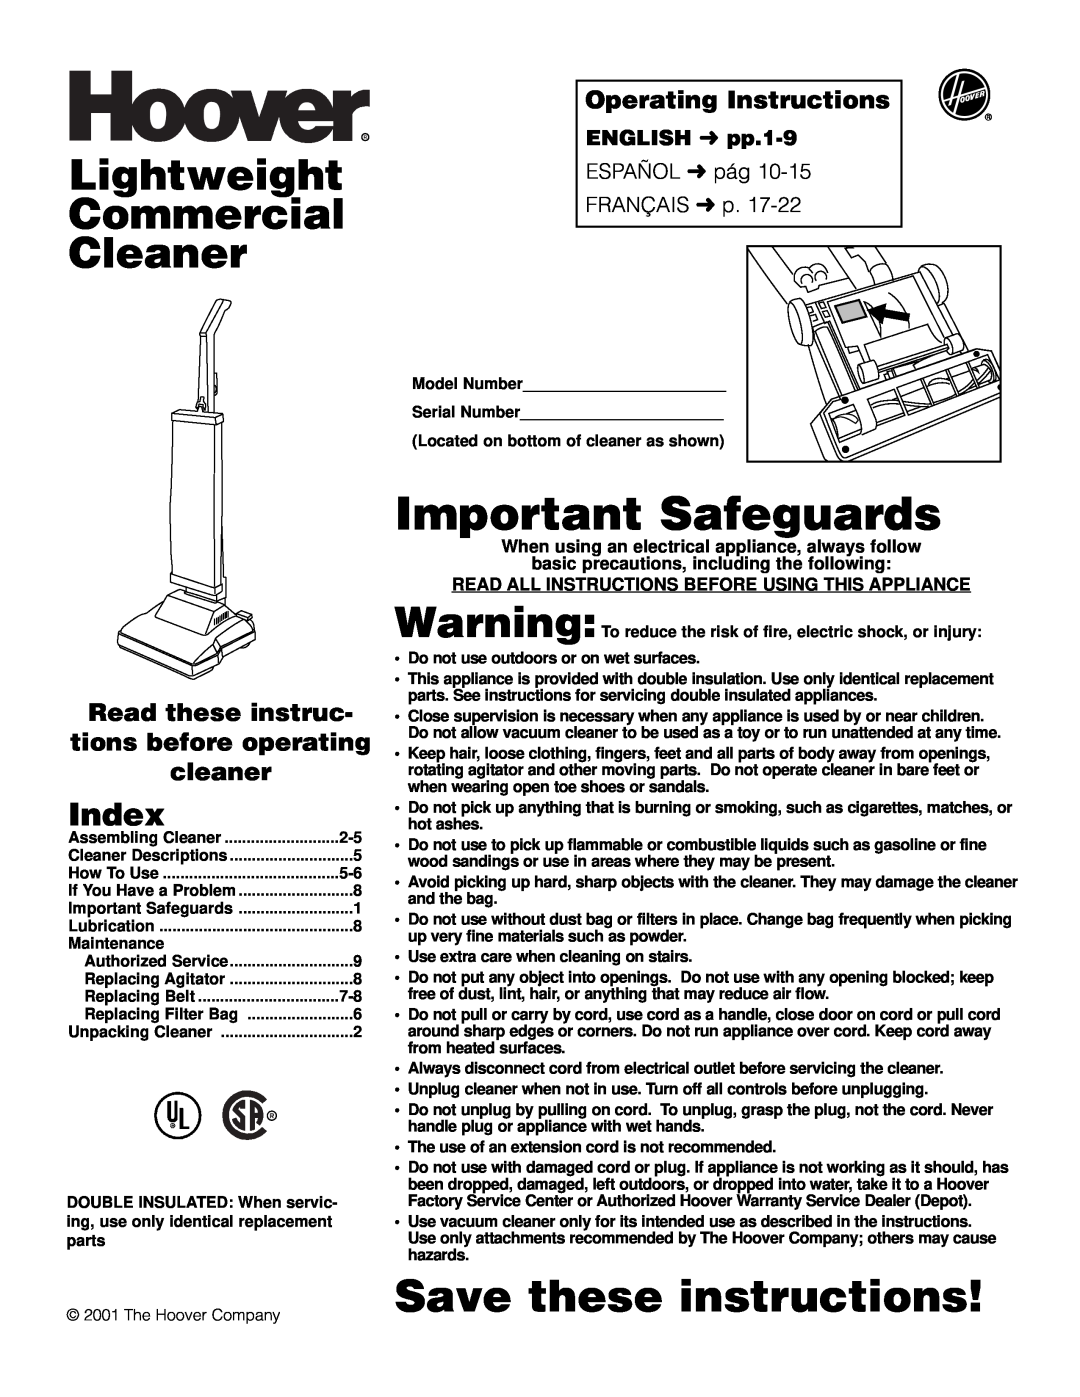 Hoover C1404 warranty Index, Read these instruc tions before operating cleaner, Operating Instructions, ENGLISH pp.1-9 